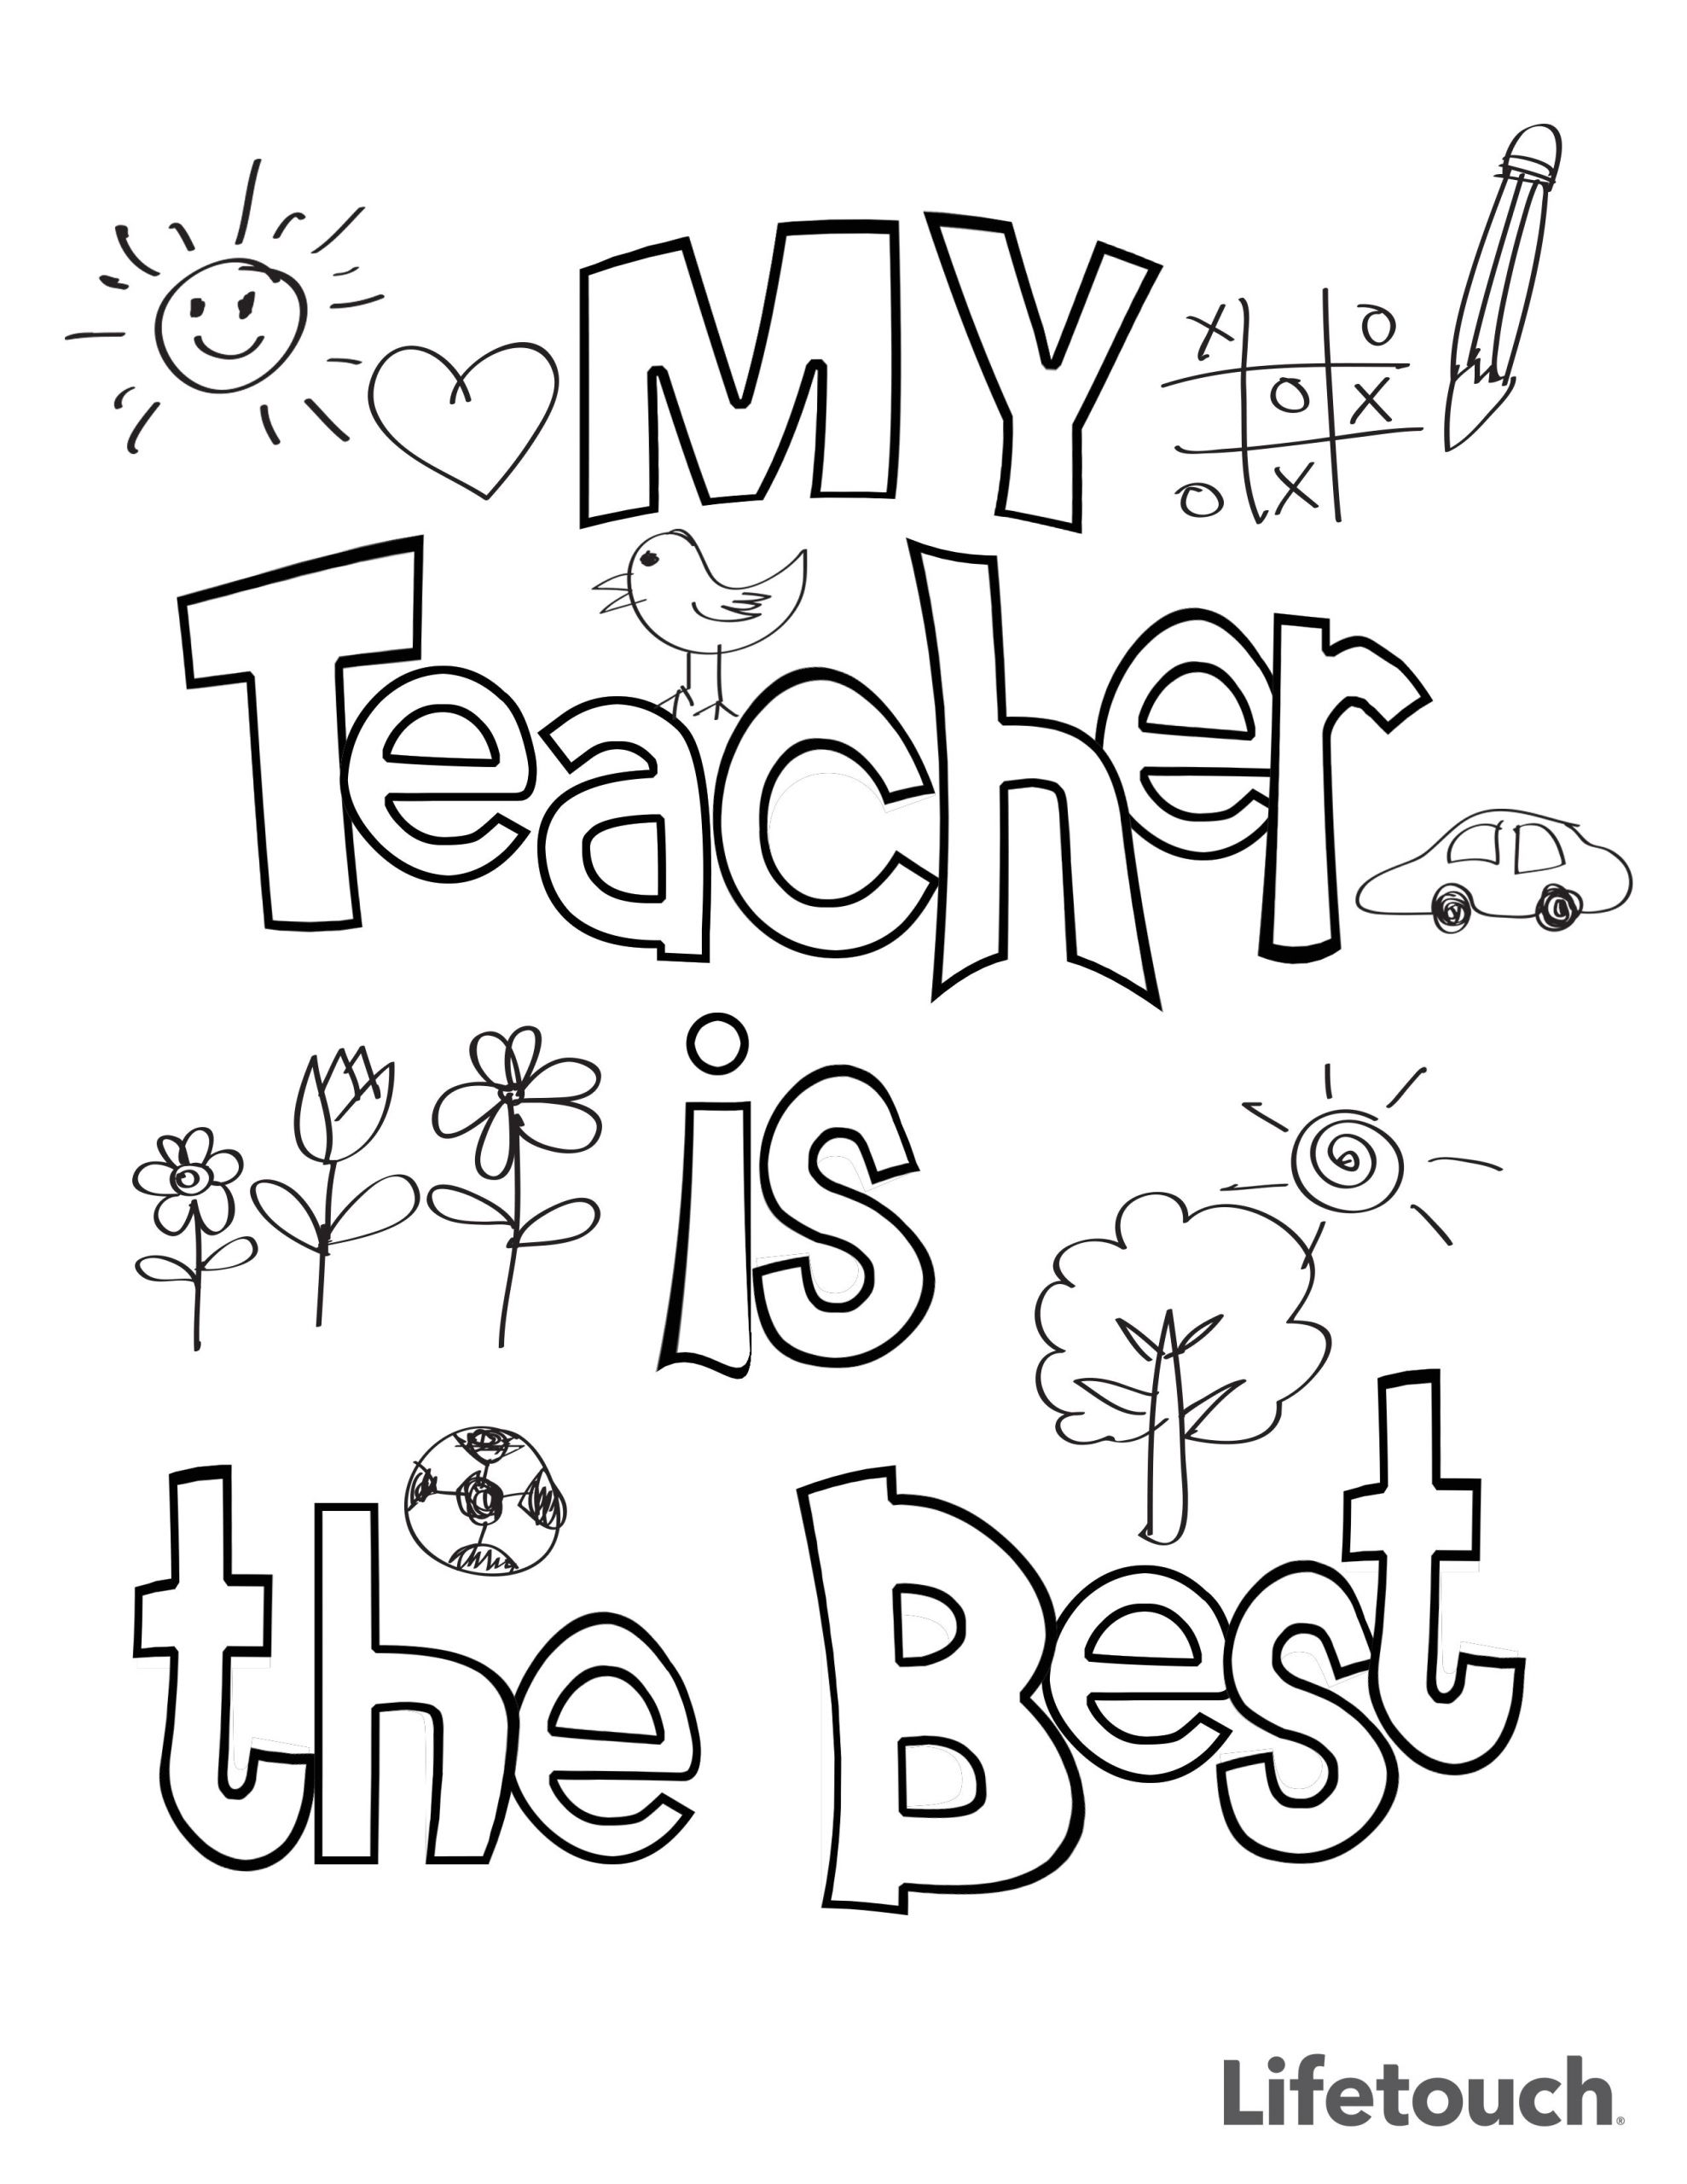 Printable Teachers Day Coloring Pages Printable World Holiday